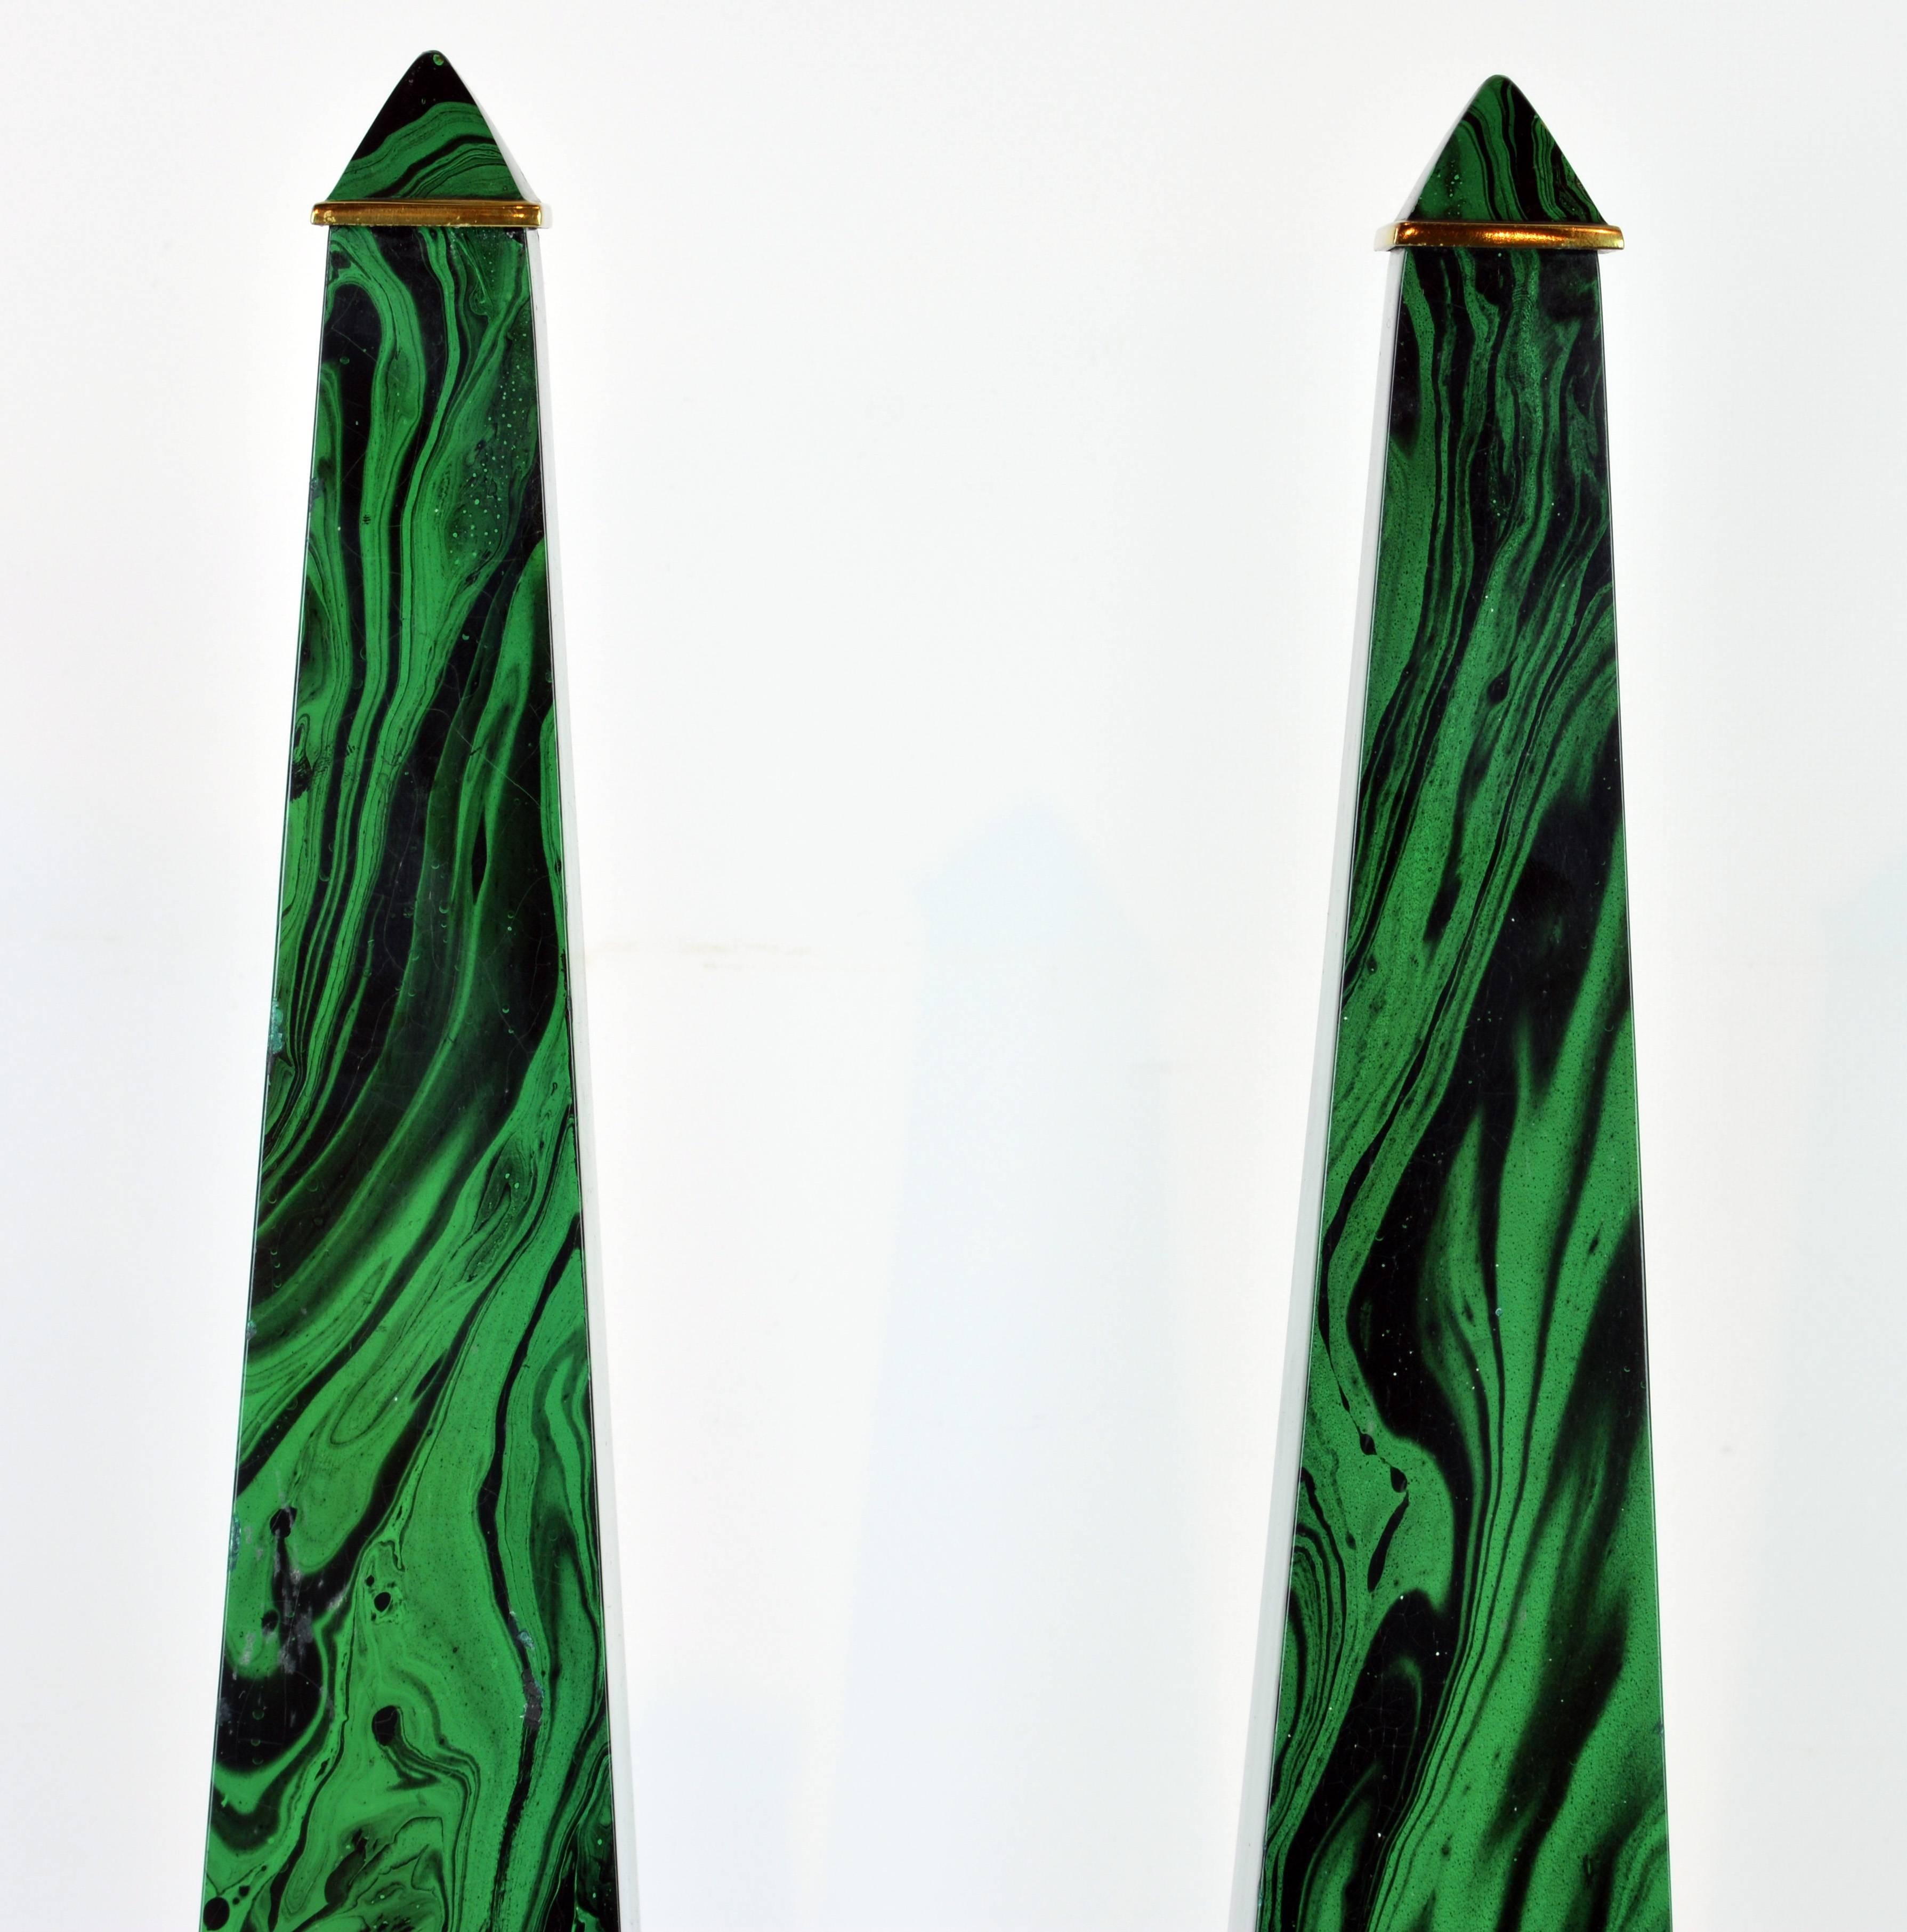 American Pair of Tall Paul Hanson Midcentury Faux Malachite and Brass Obelisk Models